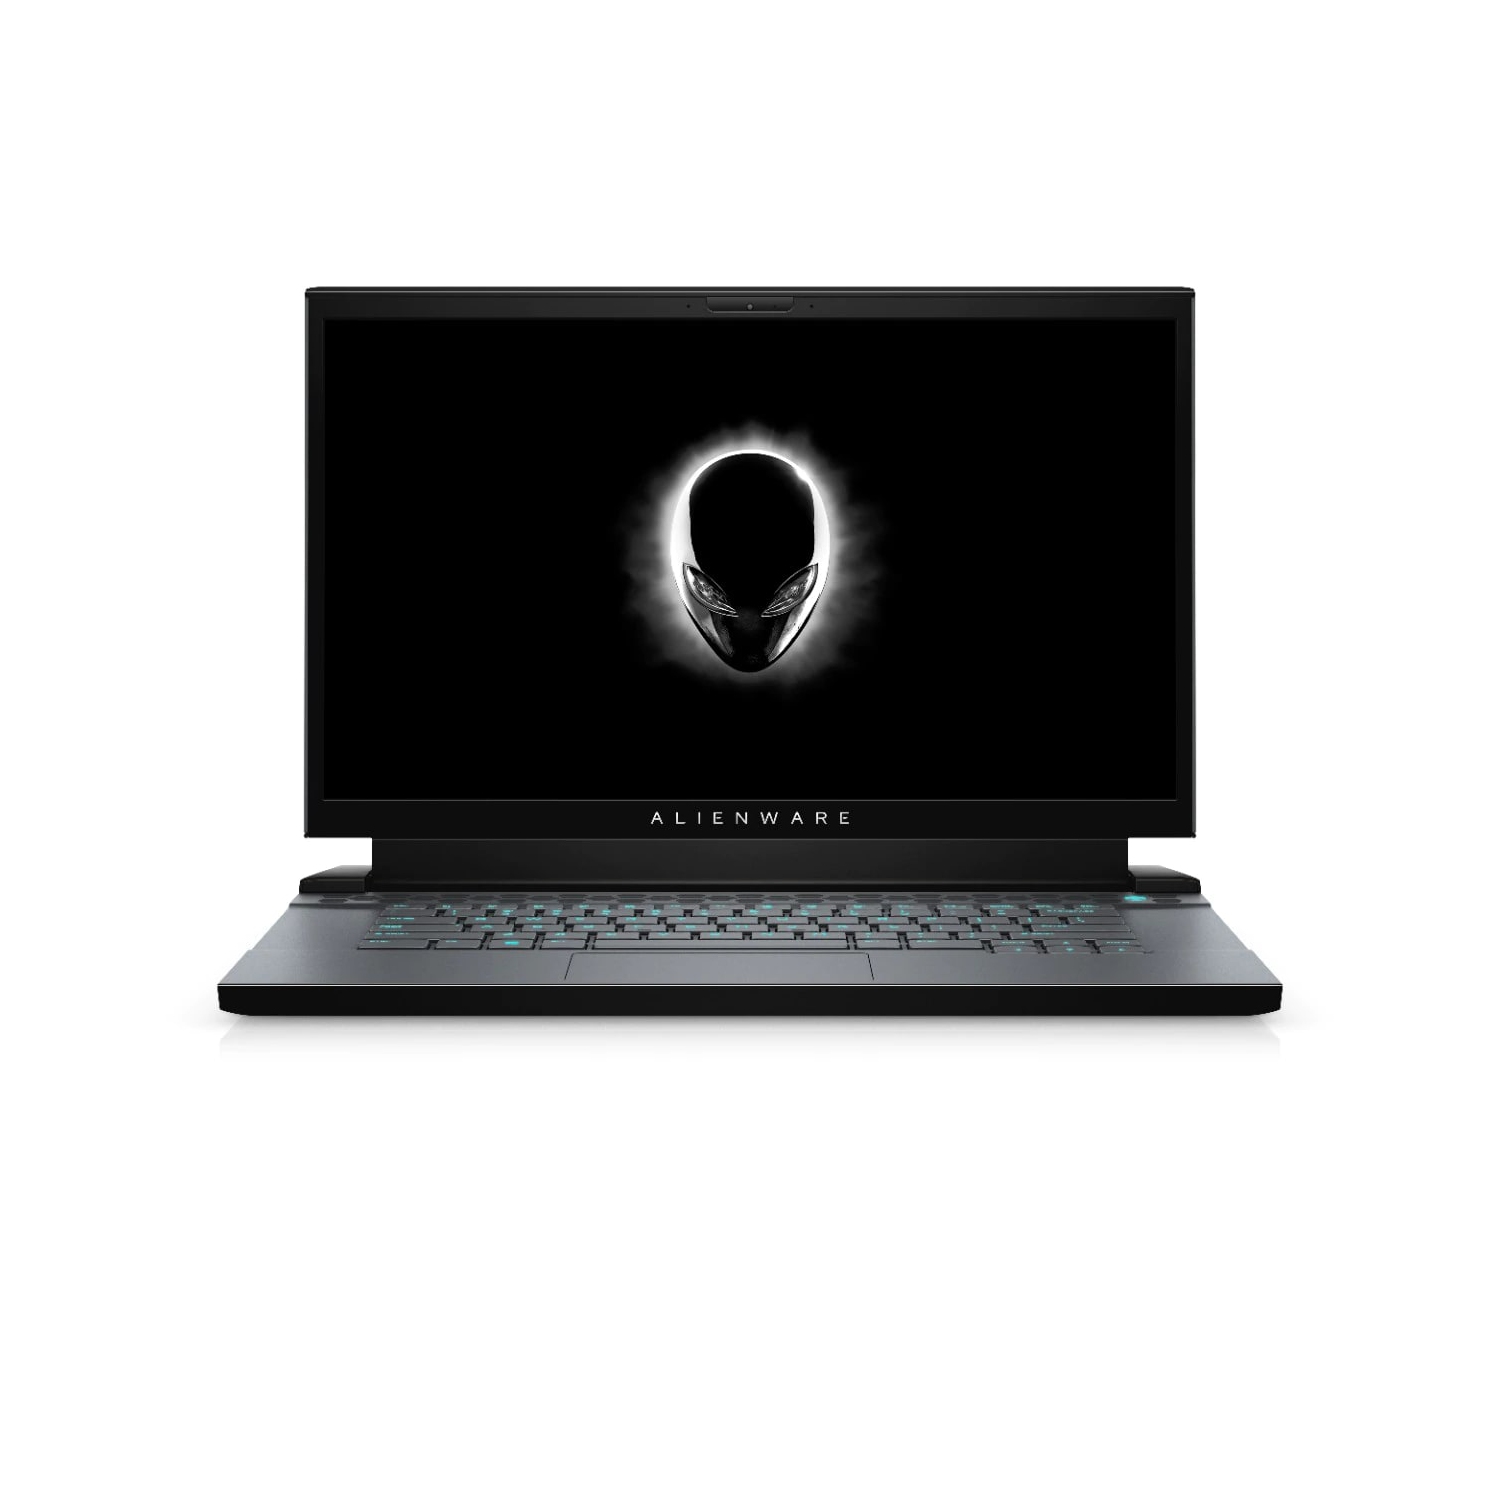 Refurbished (Excellent) - Dell Alienware m15 R2 Gaming Laptop (2019) | 15.6" FHD | Core i7 - 1TB SSD - 16GB RAM - RTX 2080 | 6 Cores @ 4.5 GHz Certified Refurbished